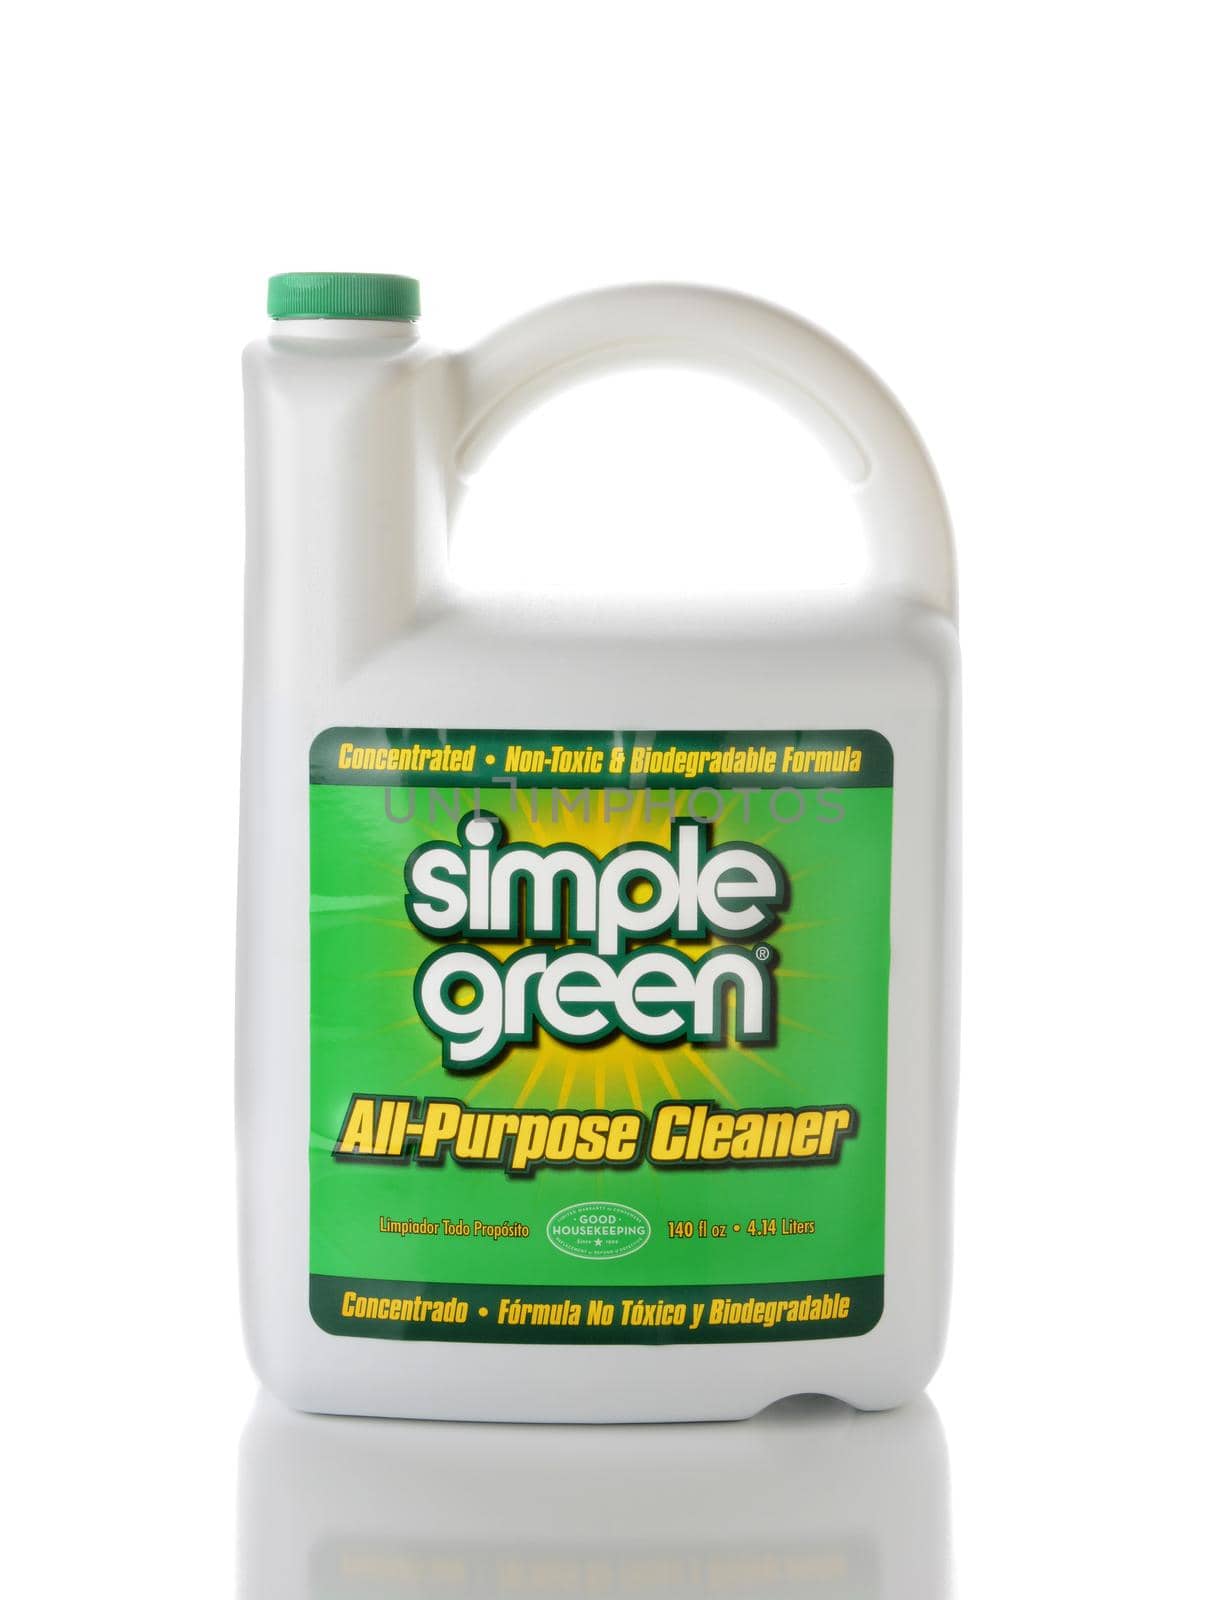 IRVINE, CA - JUNE 2, 2015: A bottle of Simple Green All-Purpose Cleaner. Produced by Sunshine Makers, it is an environmentally friendly, non-toxic, and biodegradable cleaner.